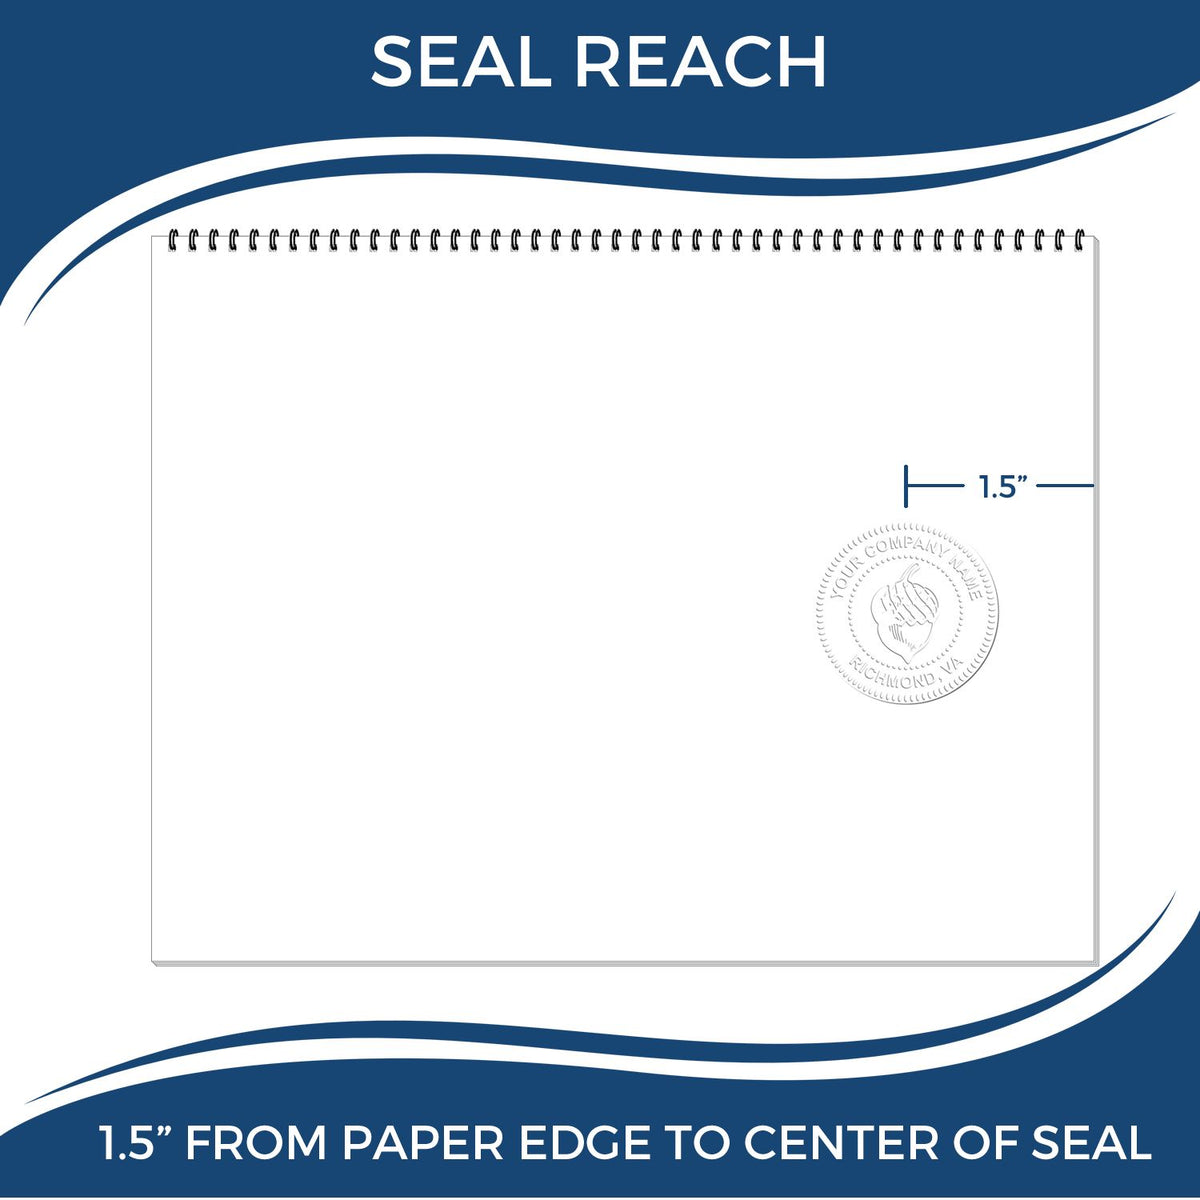 An infographic showing the seal reach which is represented by a ruler and a miniature seal image of the Soft Pocket Wyoming Landscape Architect Embosser